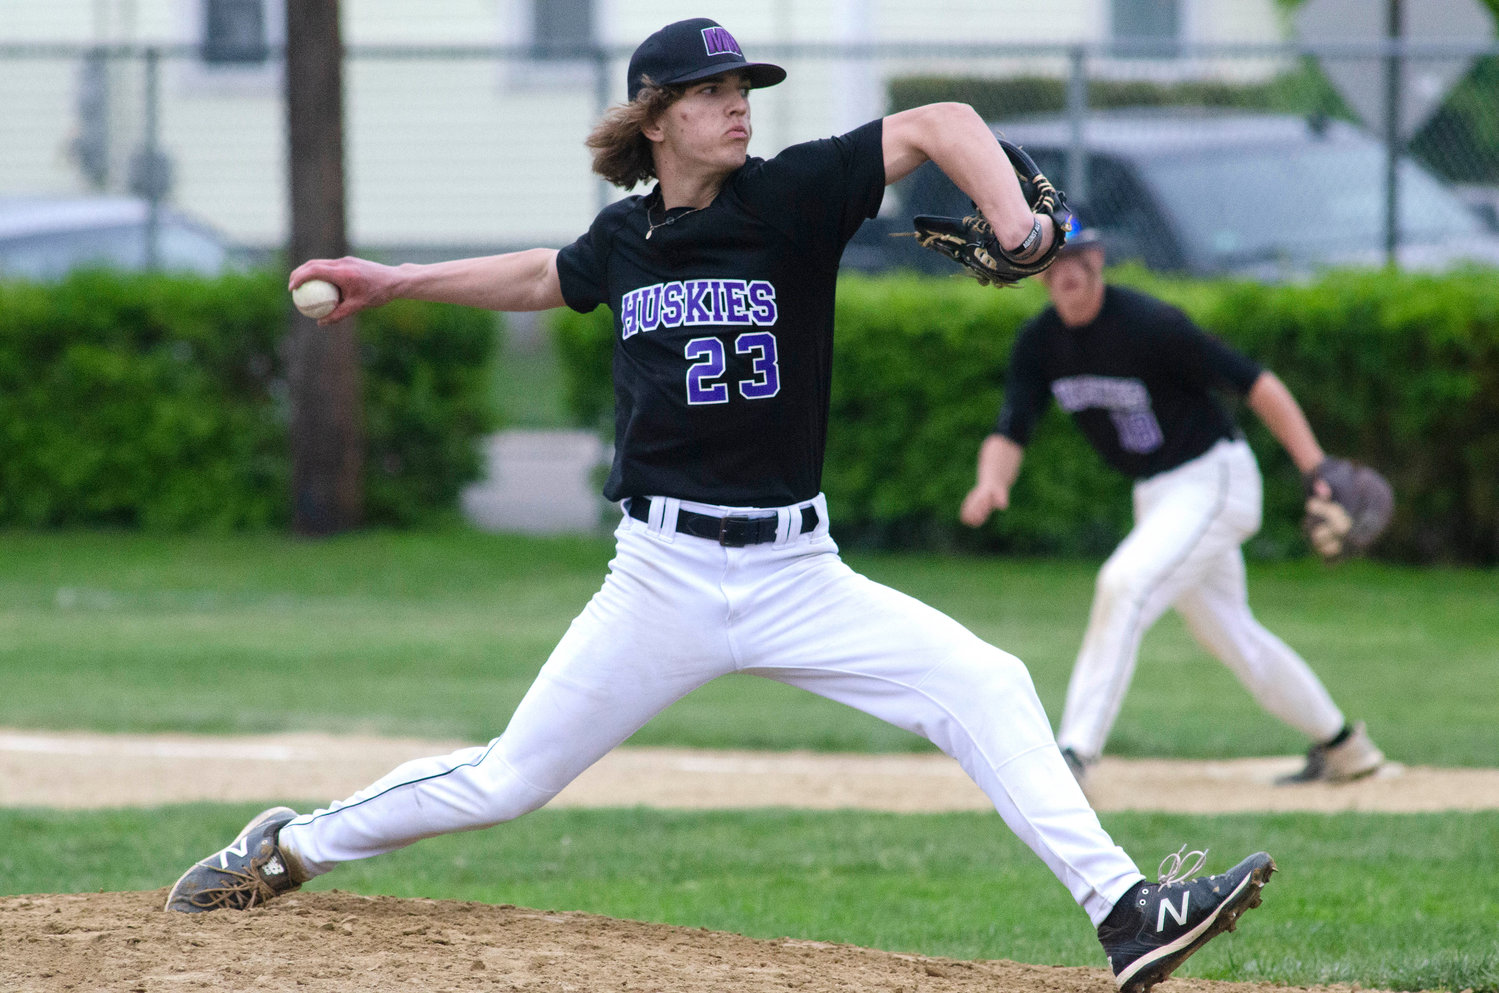 Mt. Hope starting pitcher Brad Denson struck out ten in a complete game, two hit shut out as the Huskies beat La Salle 3-0 in Providence on Thursday afternoon.